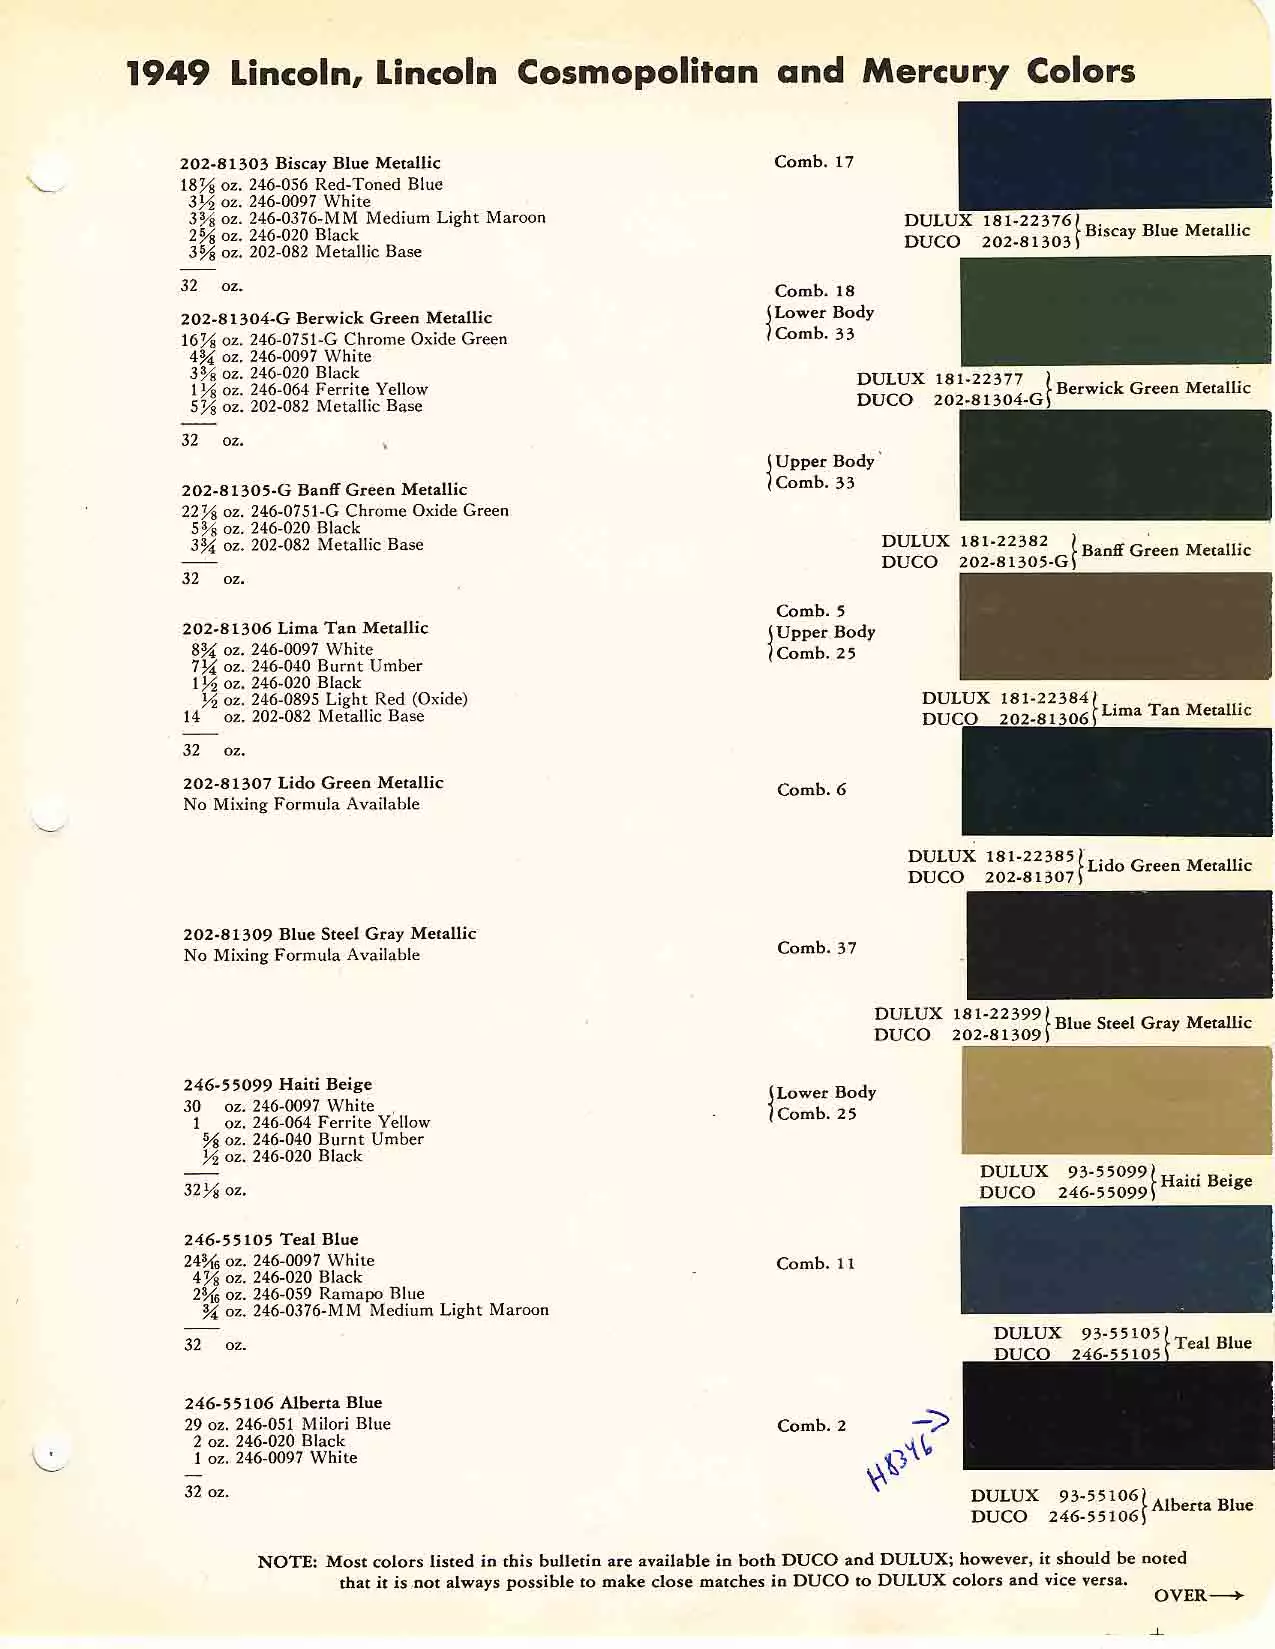 exterior colors, their codes, and example swatches used on lincoln & mercury vehicles in 1949